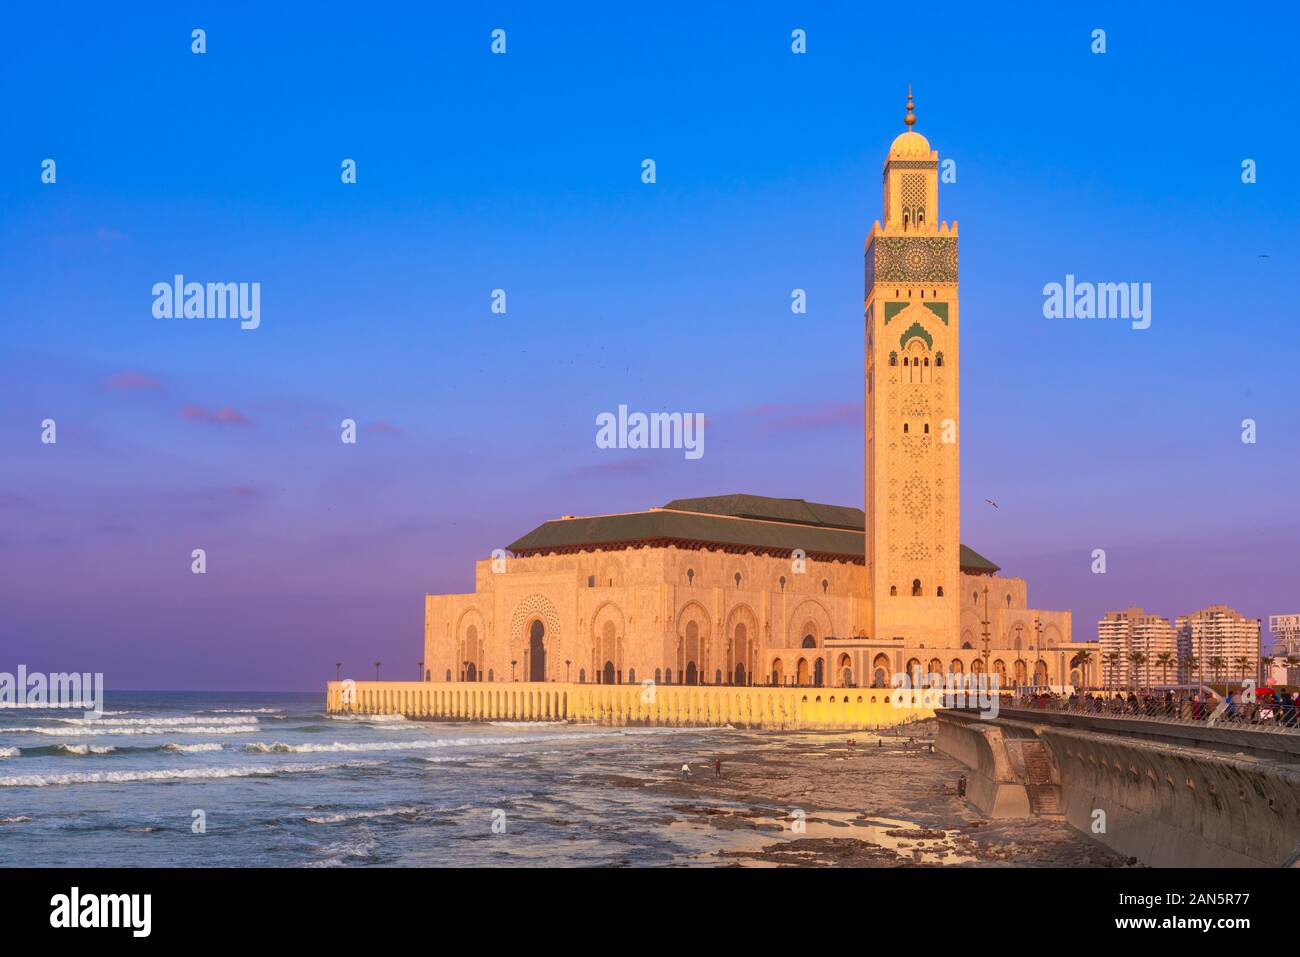 The Hassan II Mosque is a mosque in Casablanca, Morocco. It is the largest mosque in Morocco with the tallest minaret in the world. Stock Photo